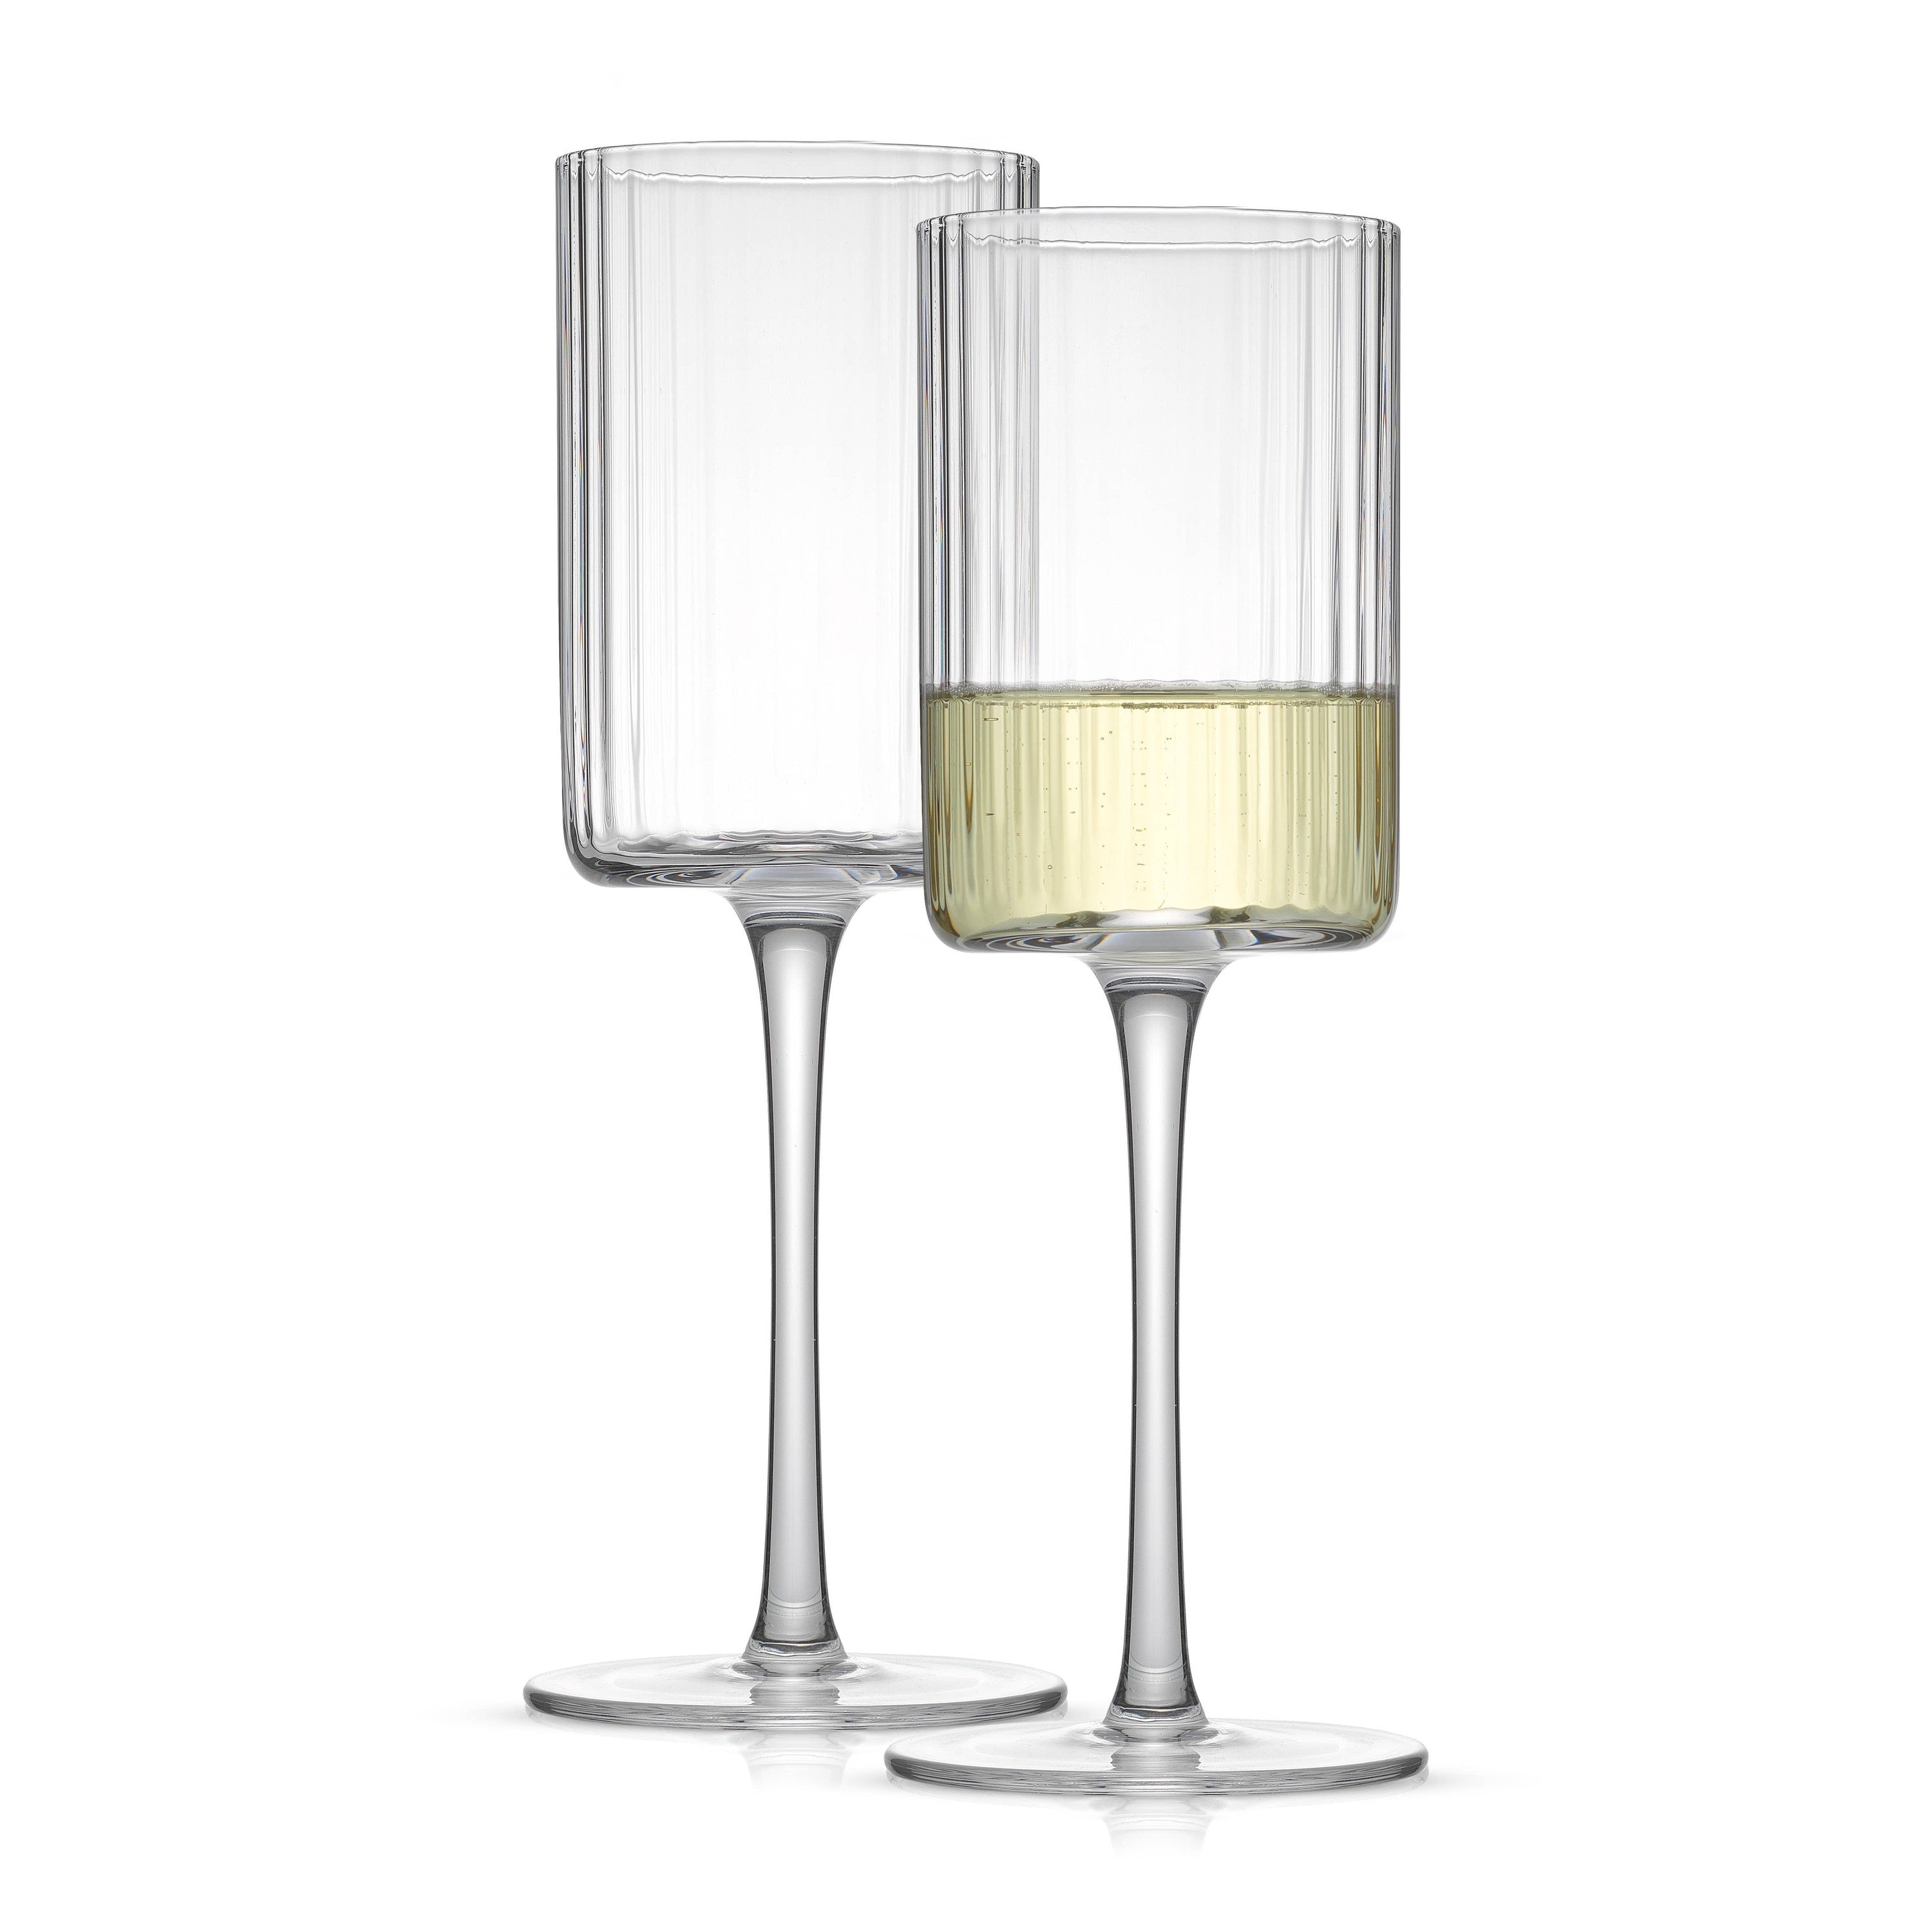 15 oz Wine Glasses with Frosted Design (Set of 2)